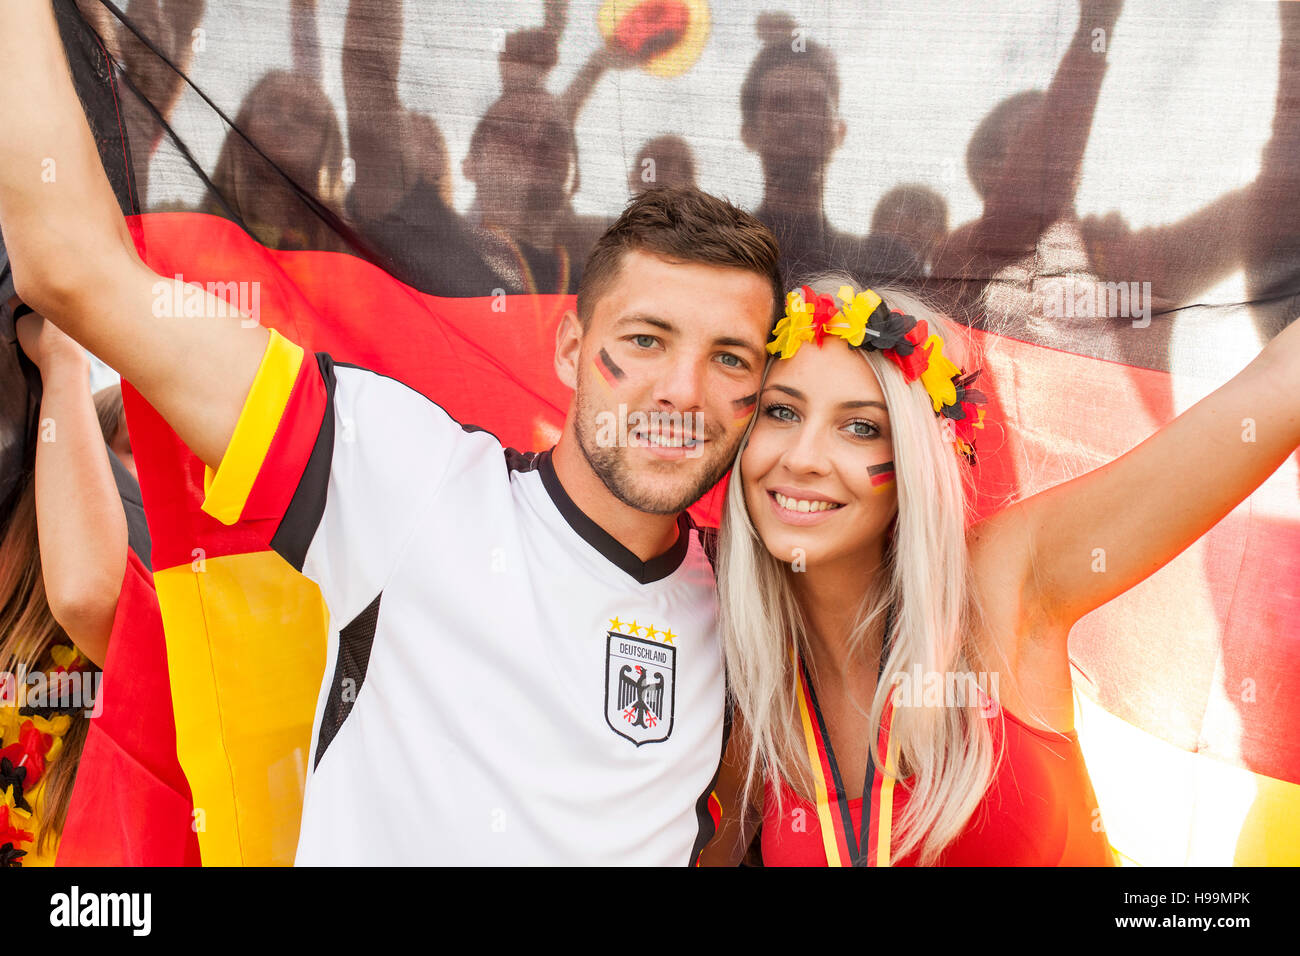 Soccer fans cheering allemand Banque D'Images